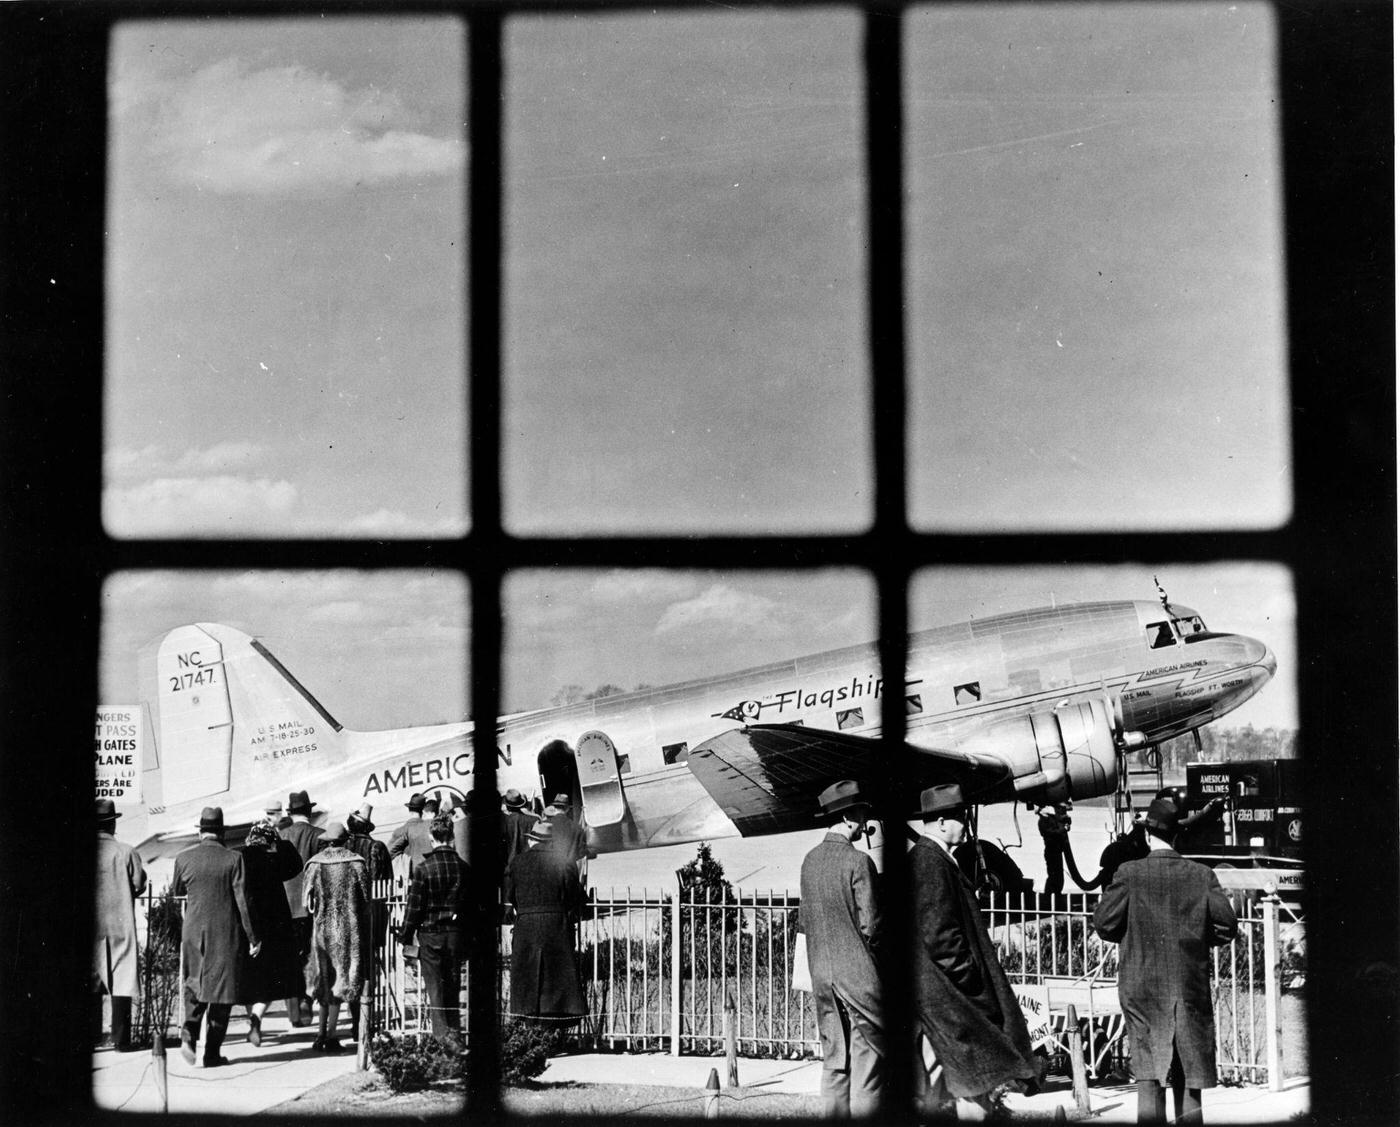 Through a window of the terminal at LaGuardia Airport, passengers are boarding an American Airlines' 'Flagship' plane on the tarmac in 1946.